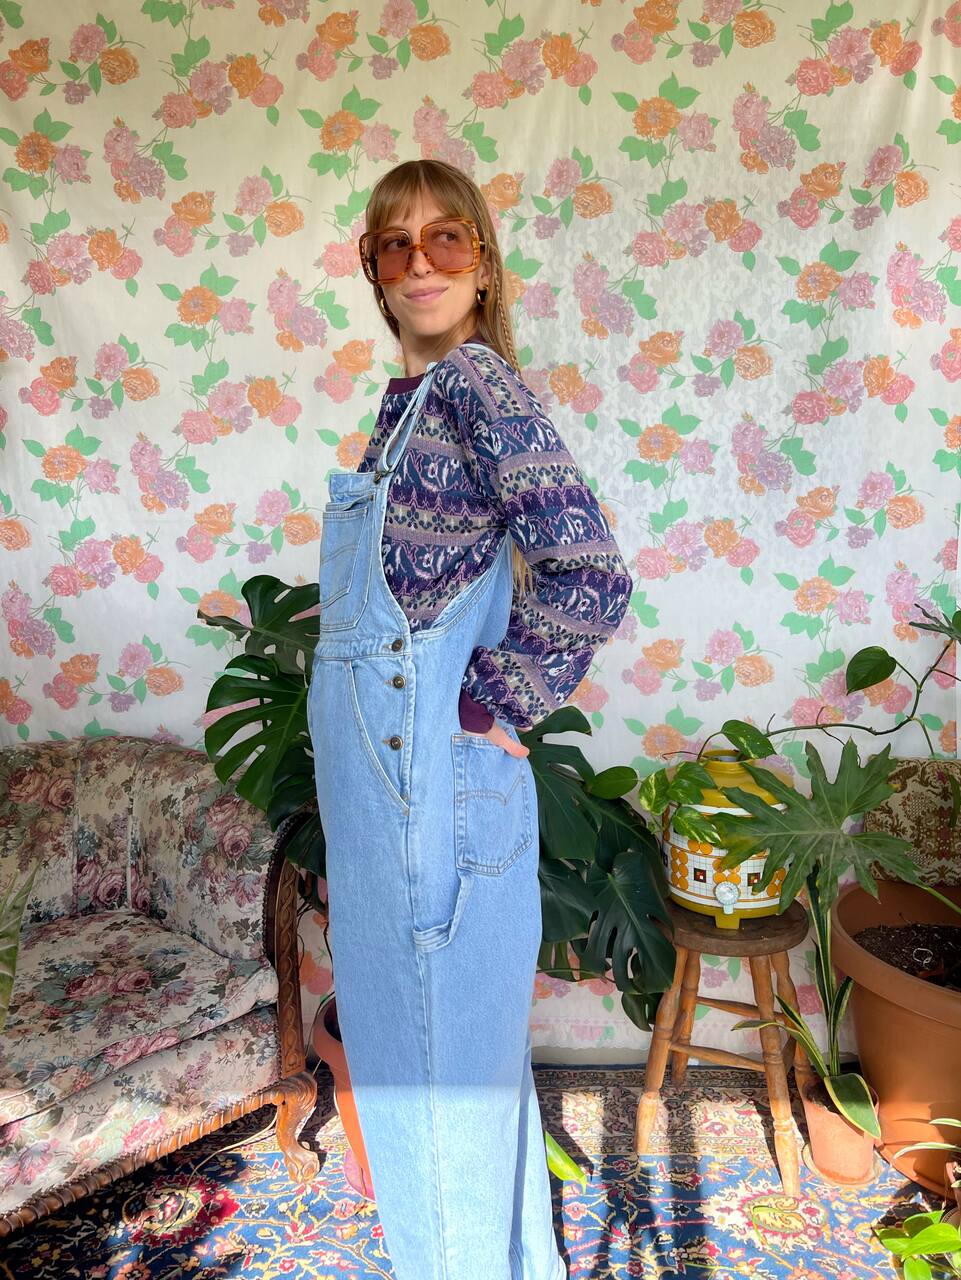 Olivia Wilde Channels the '90s in Denim Overalls and High Clogs